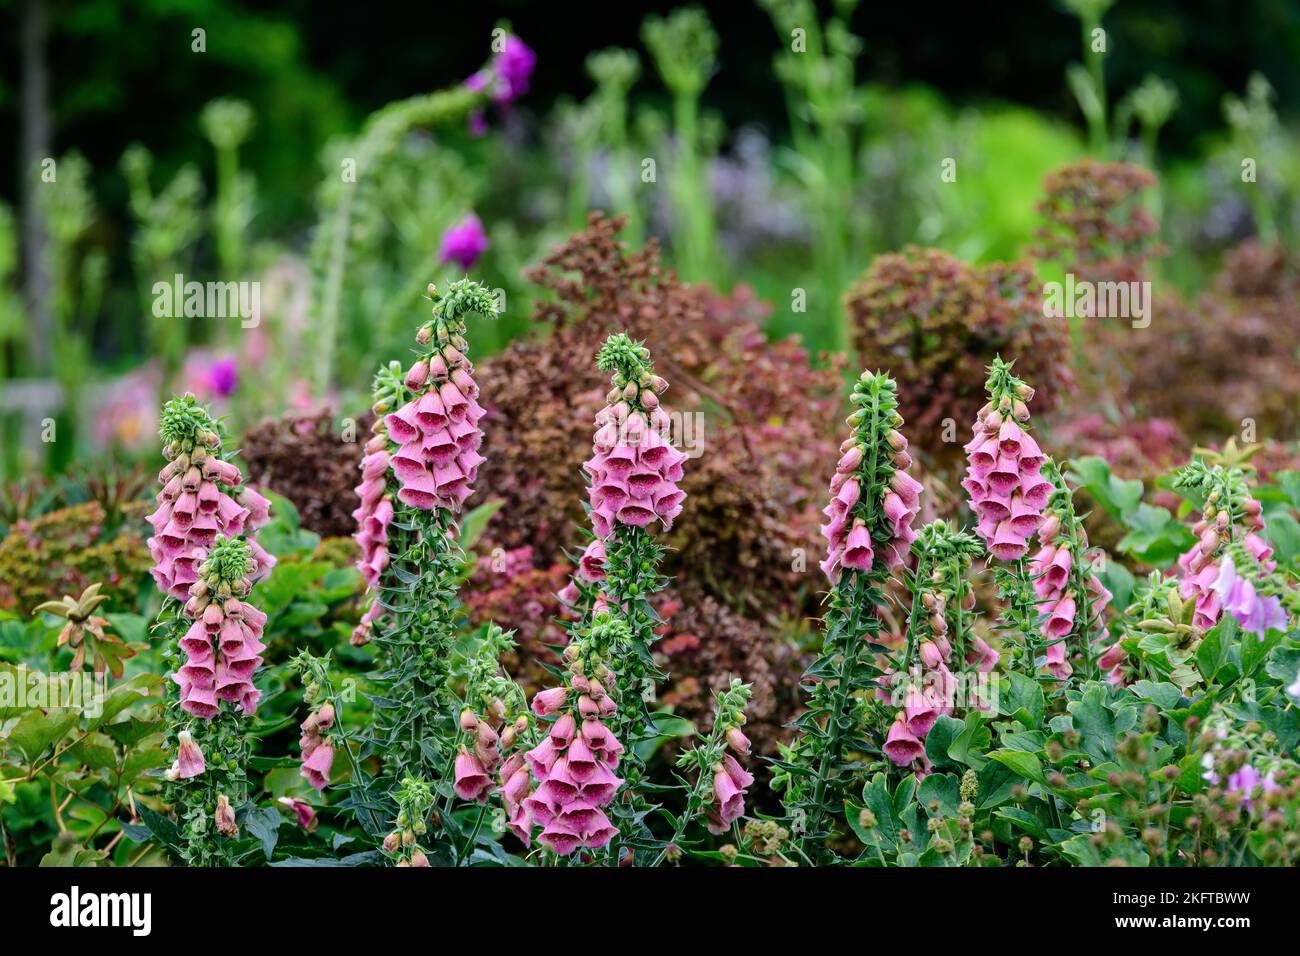 Vivid pink flowers of Digitalis plant, commonly known as foxgloves, in full bloom and green grass in a sunny spring garden, beautiful outdoor floral b Stock Photo